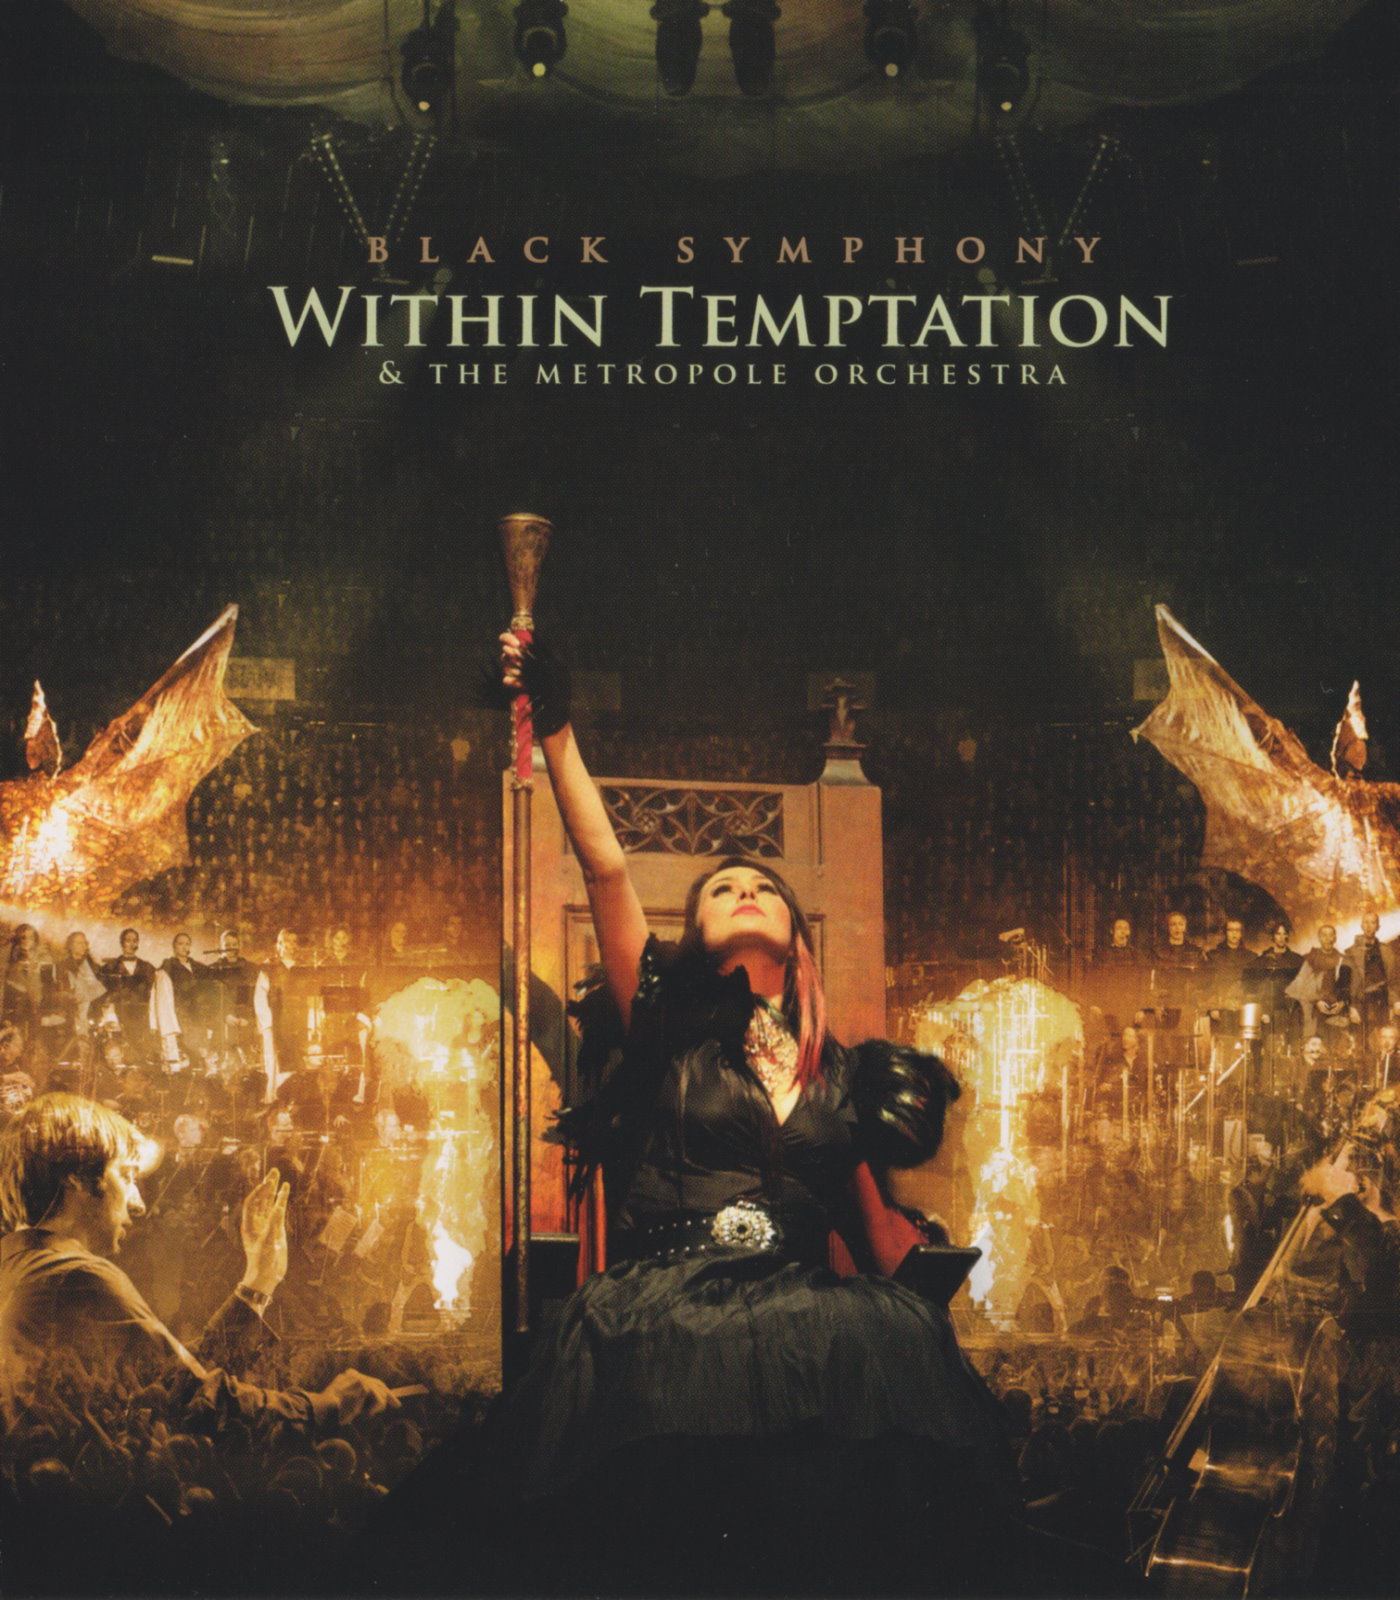 Cover - Within Temptation & The Metropole Orchestra - Black Symphony.jpg